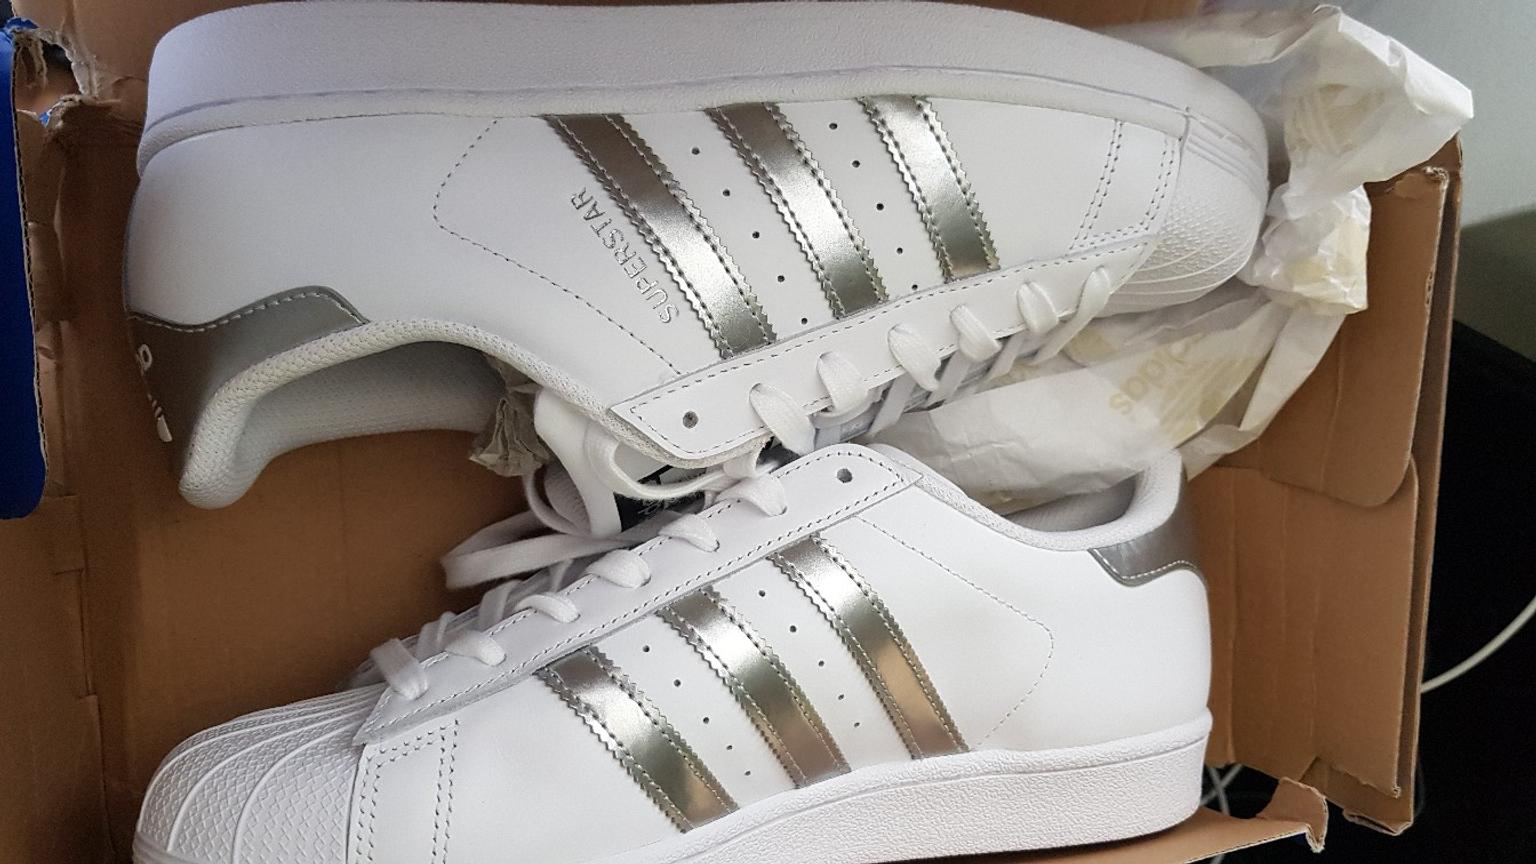 adidas white and silver superstar trainers